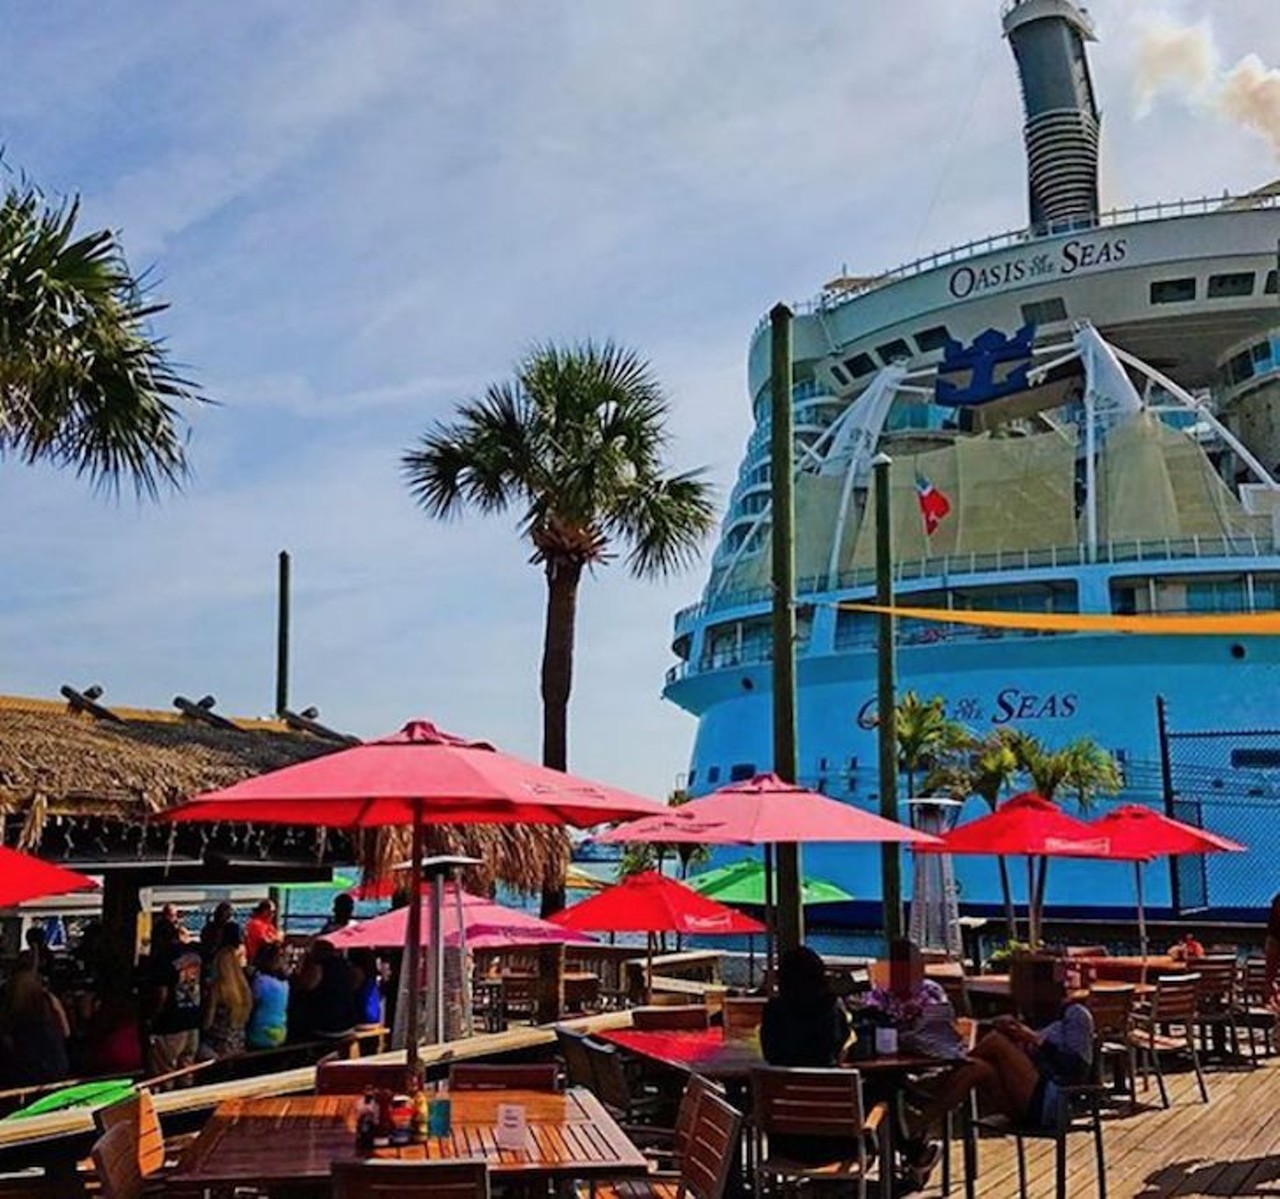  Grills Seafood Deck and Tiki Bar
Distance from Orlando: 53 minutes
The Waterfront dining hole has an island feel located right in the port of Cape Canaveral. Sitting on the open patio you can take a glimpse at boats and cruise ships as they glide over the water and head out to sea.
505 Glen Cheek Dr., Cape Canaveral, FL 32920
Photo via hesofunky/Instagram